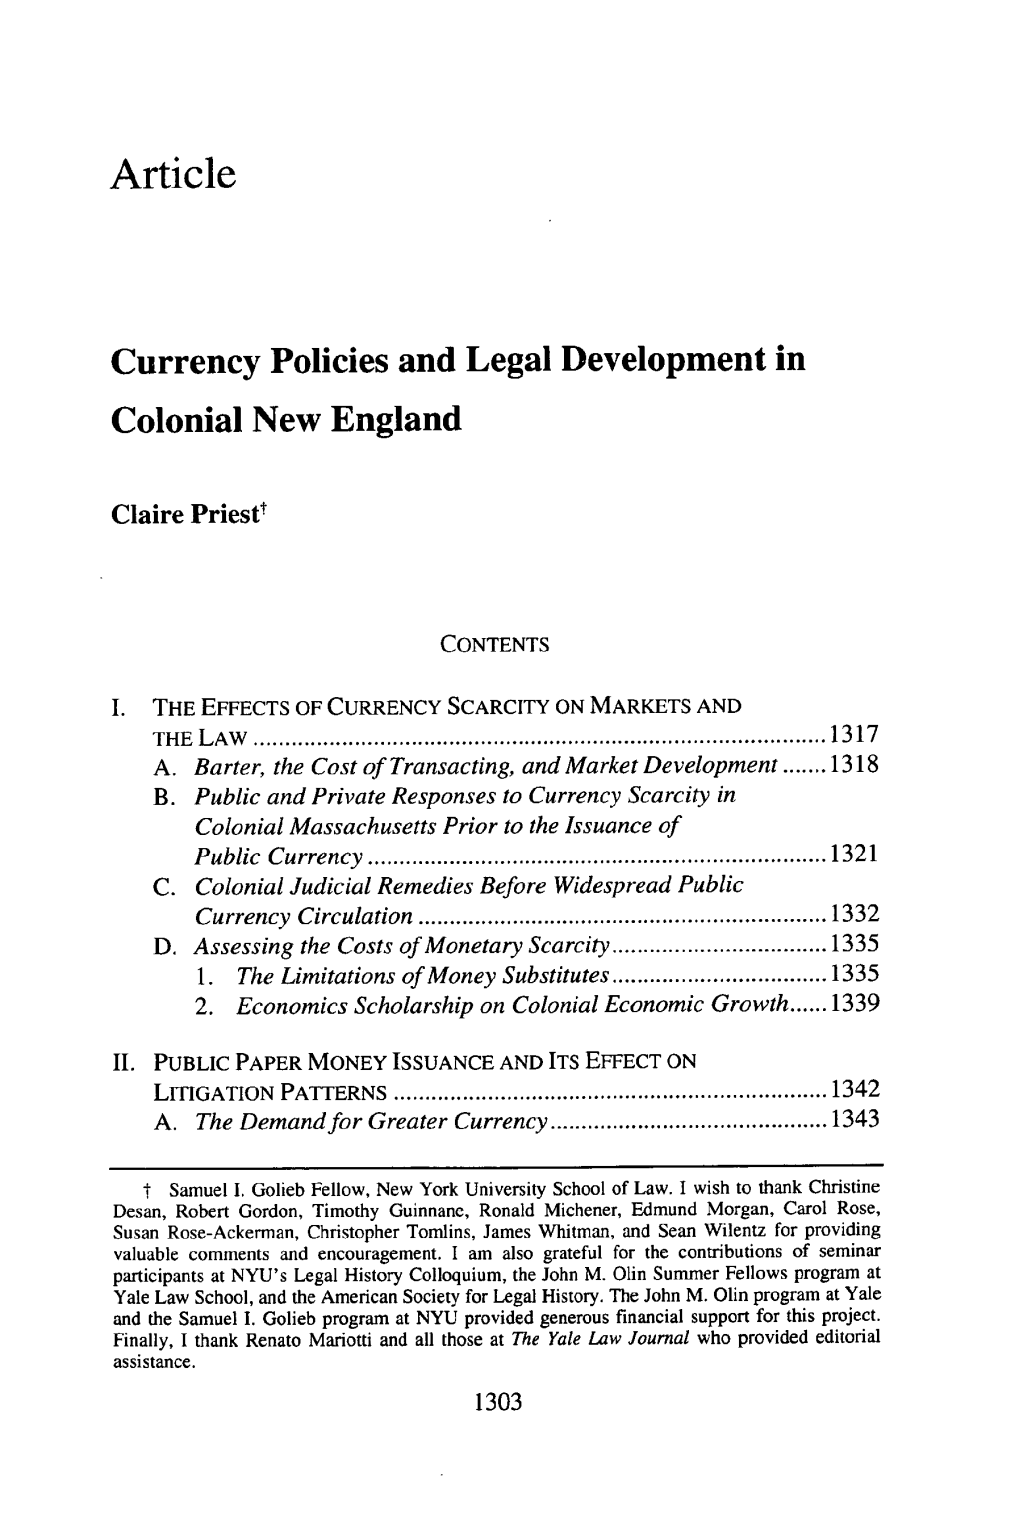 Currency Policies and Legal Development in Colonial New England